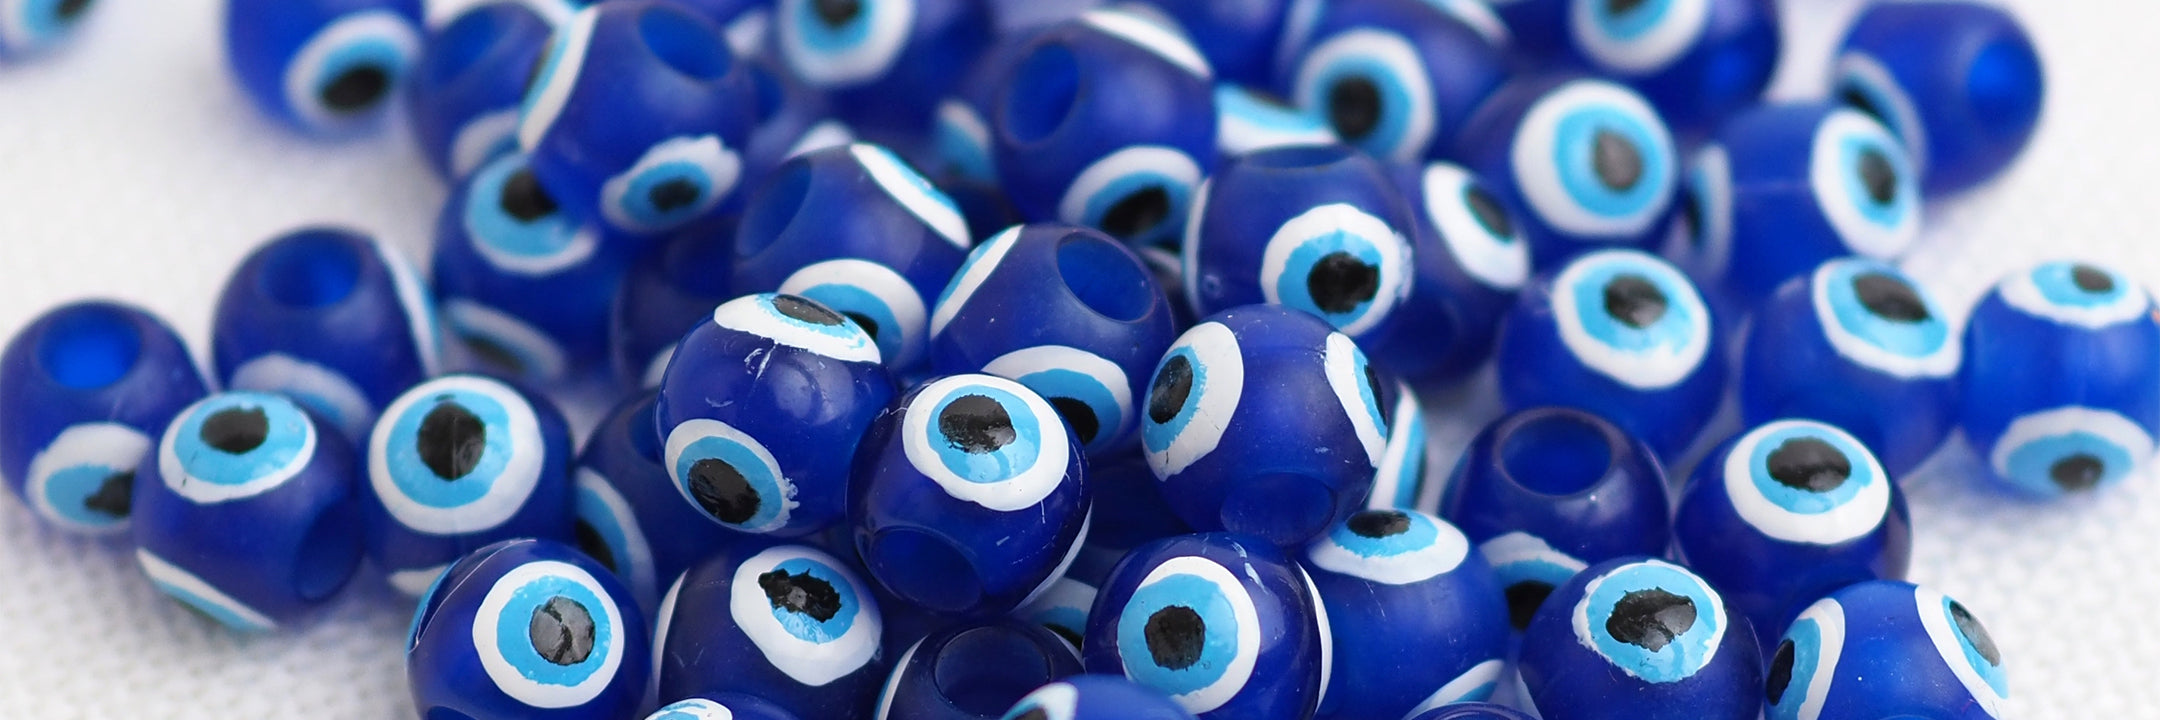 450 Pieces Evil Eye Beads DIY Crafts Evil Eye Charms with Storage Box for DIY Jewelry Bracelet Earring Necklace Craft Making, 15, Girl's, Size: 8 mm